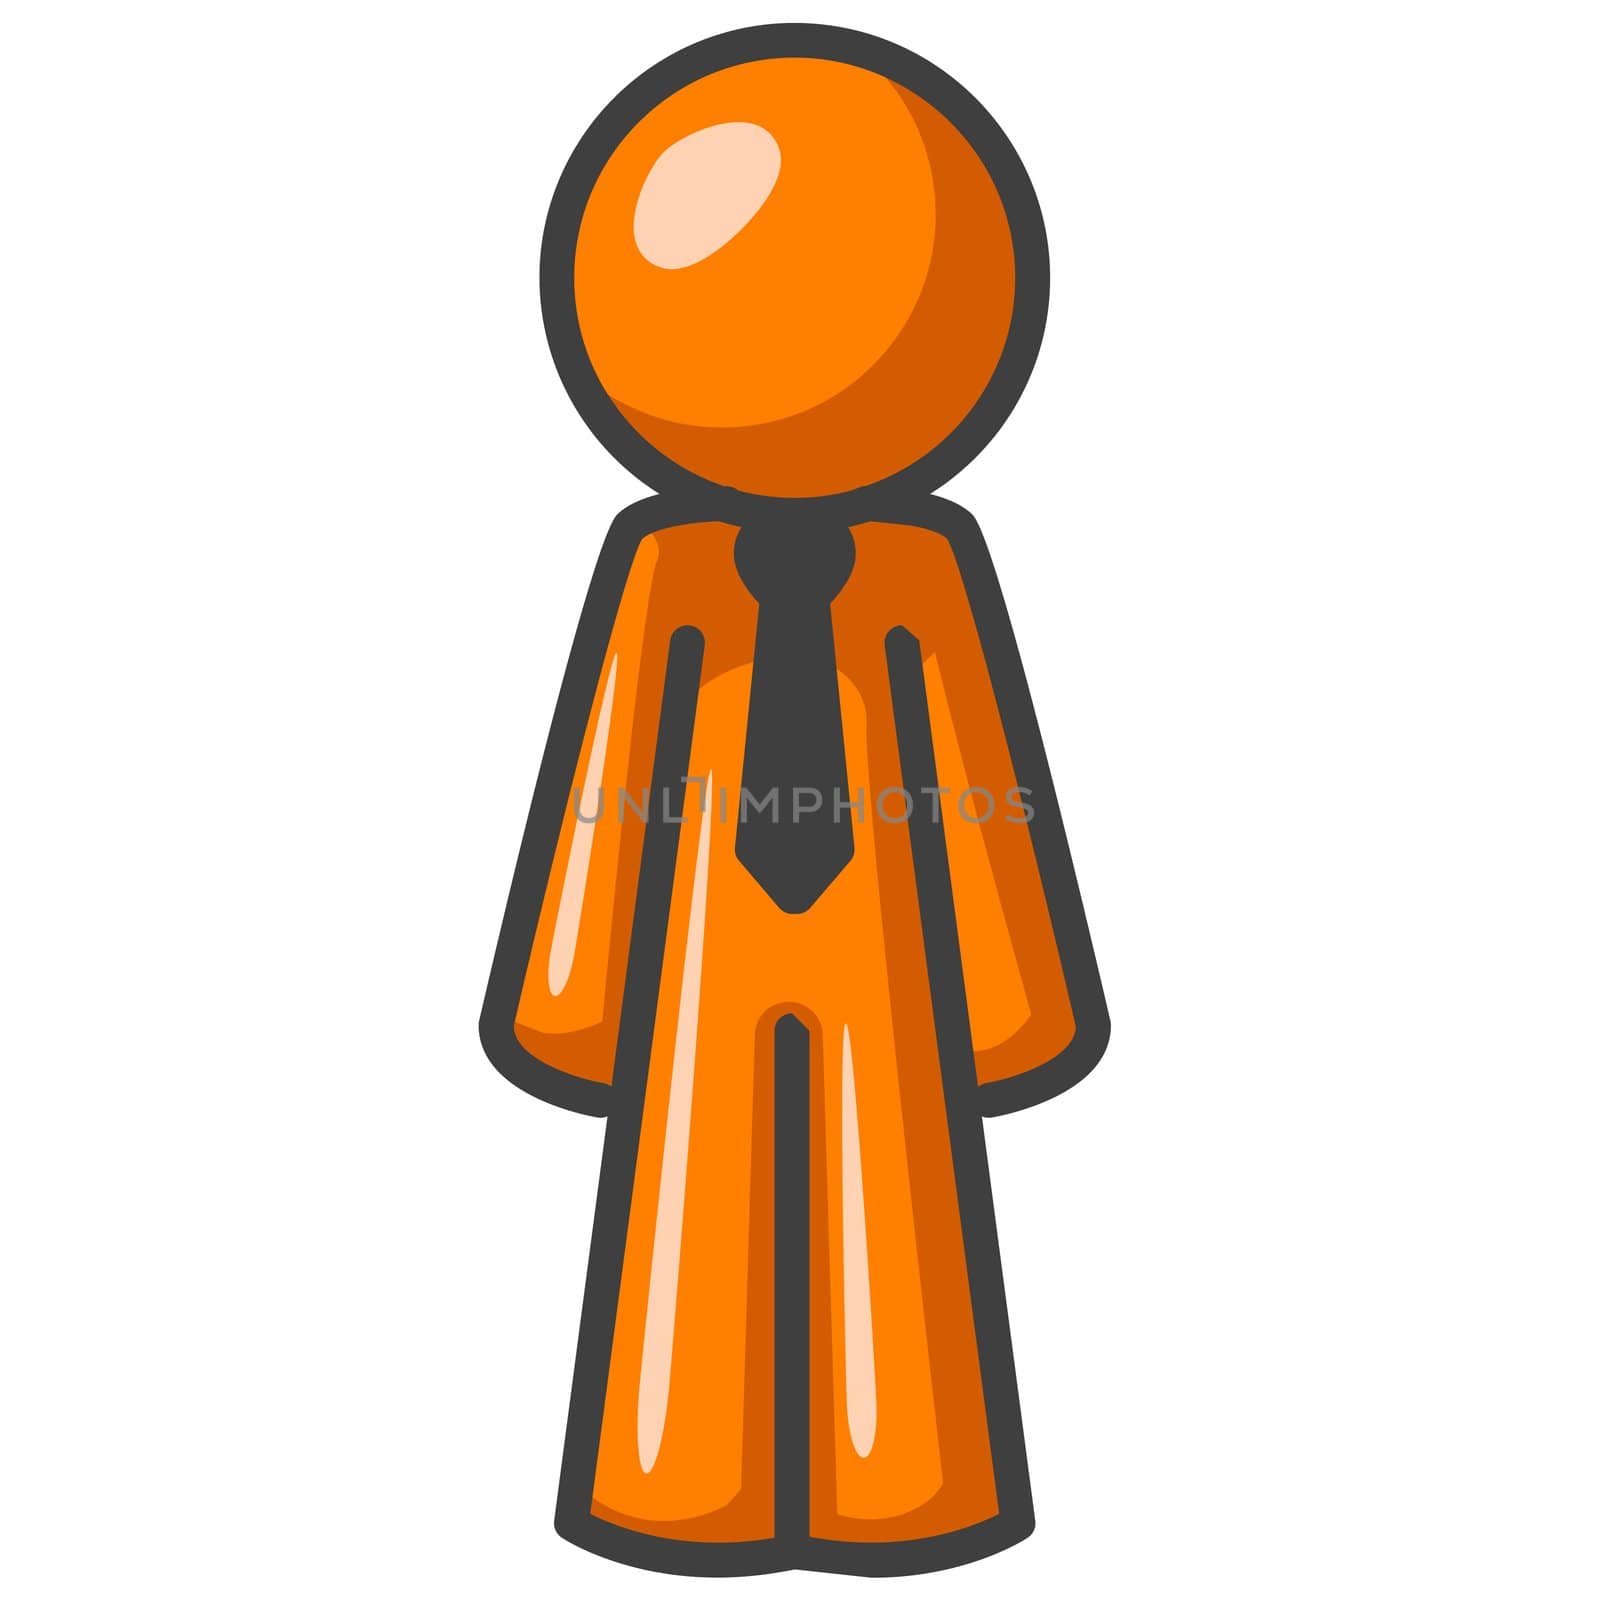 An orange man standing up straight, created to be an icon of a person.